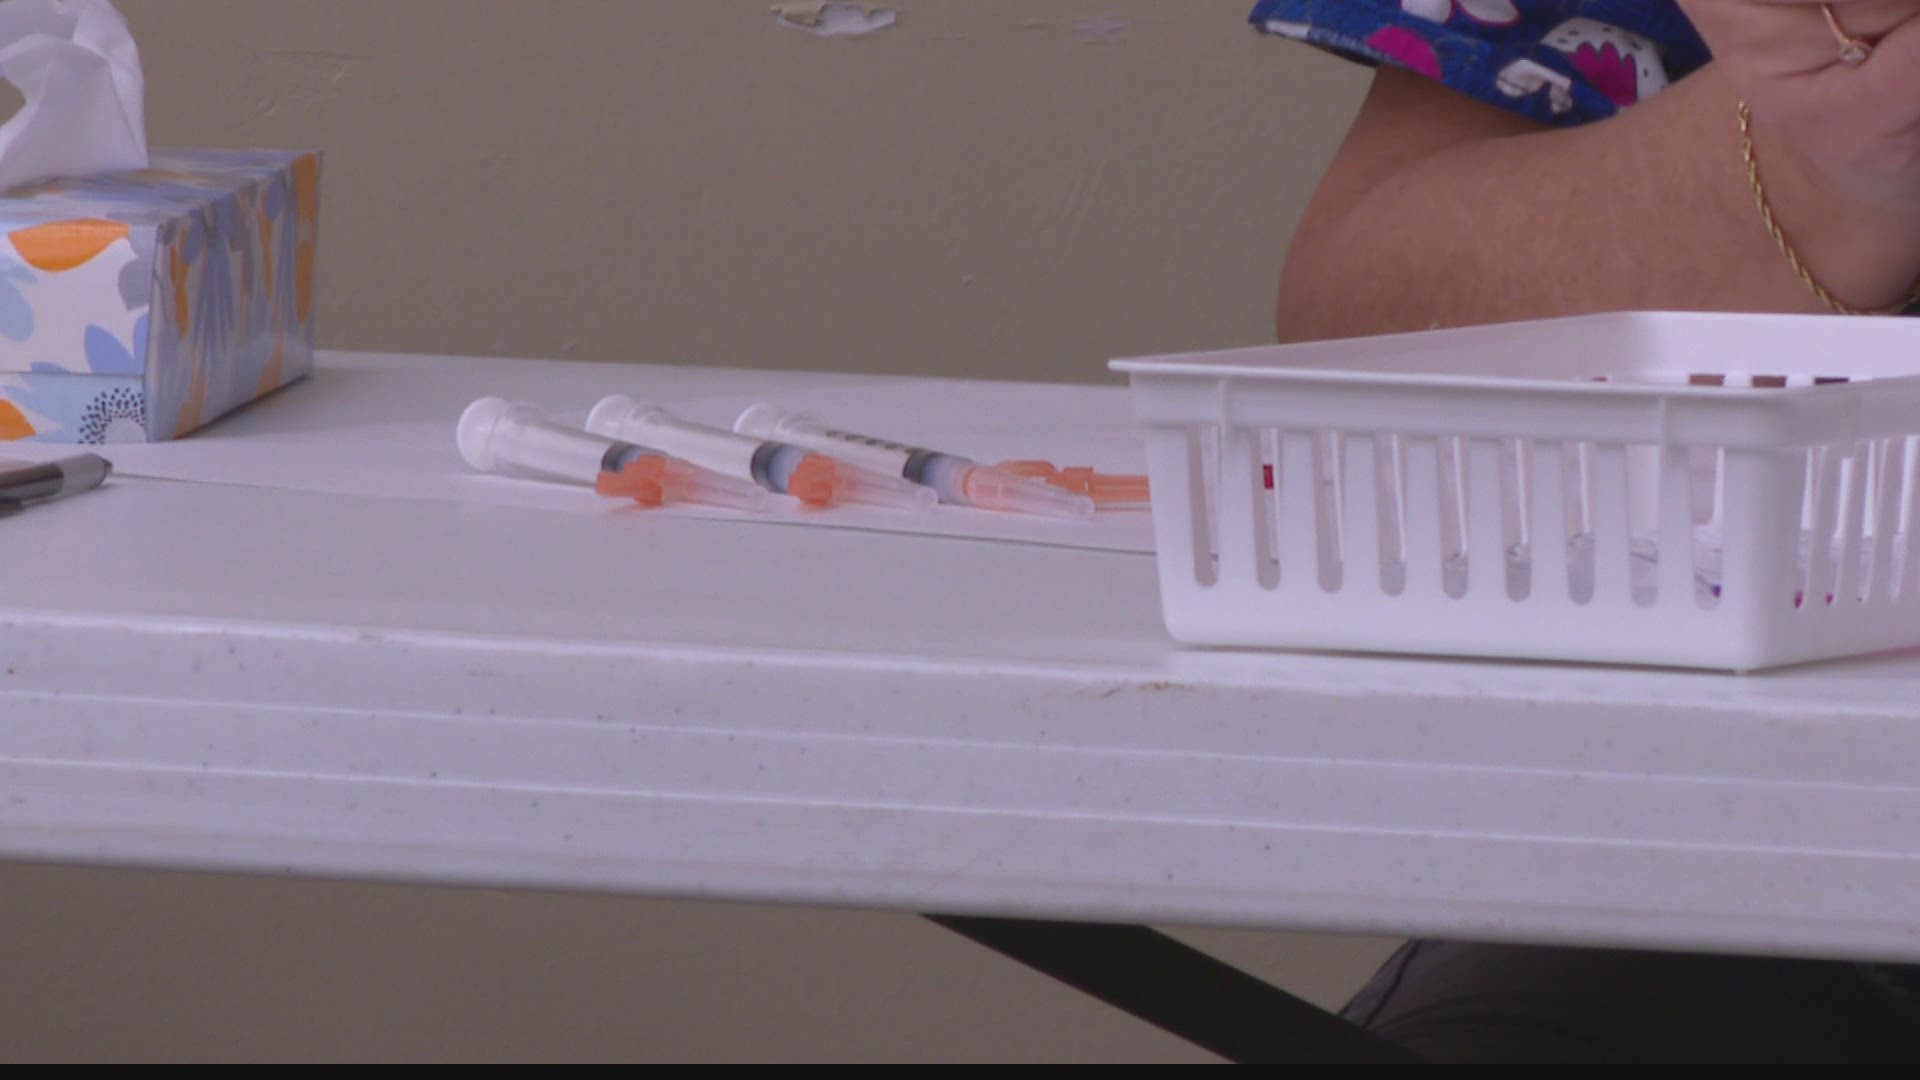 Howard County is changing tactics in its struggle with COVID-19 and the effort to vaccinate as many people as possible.